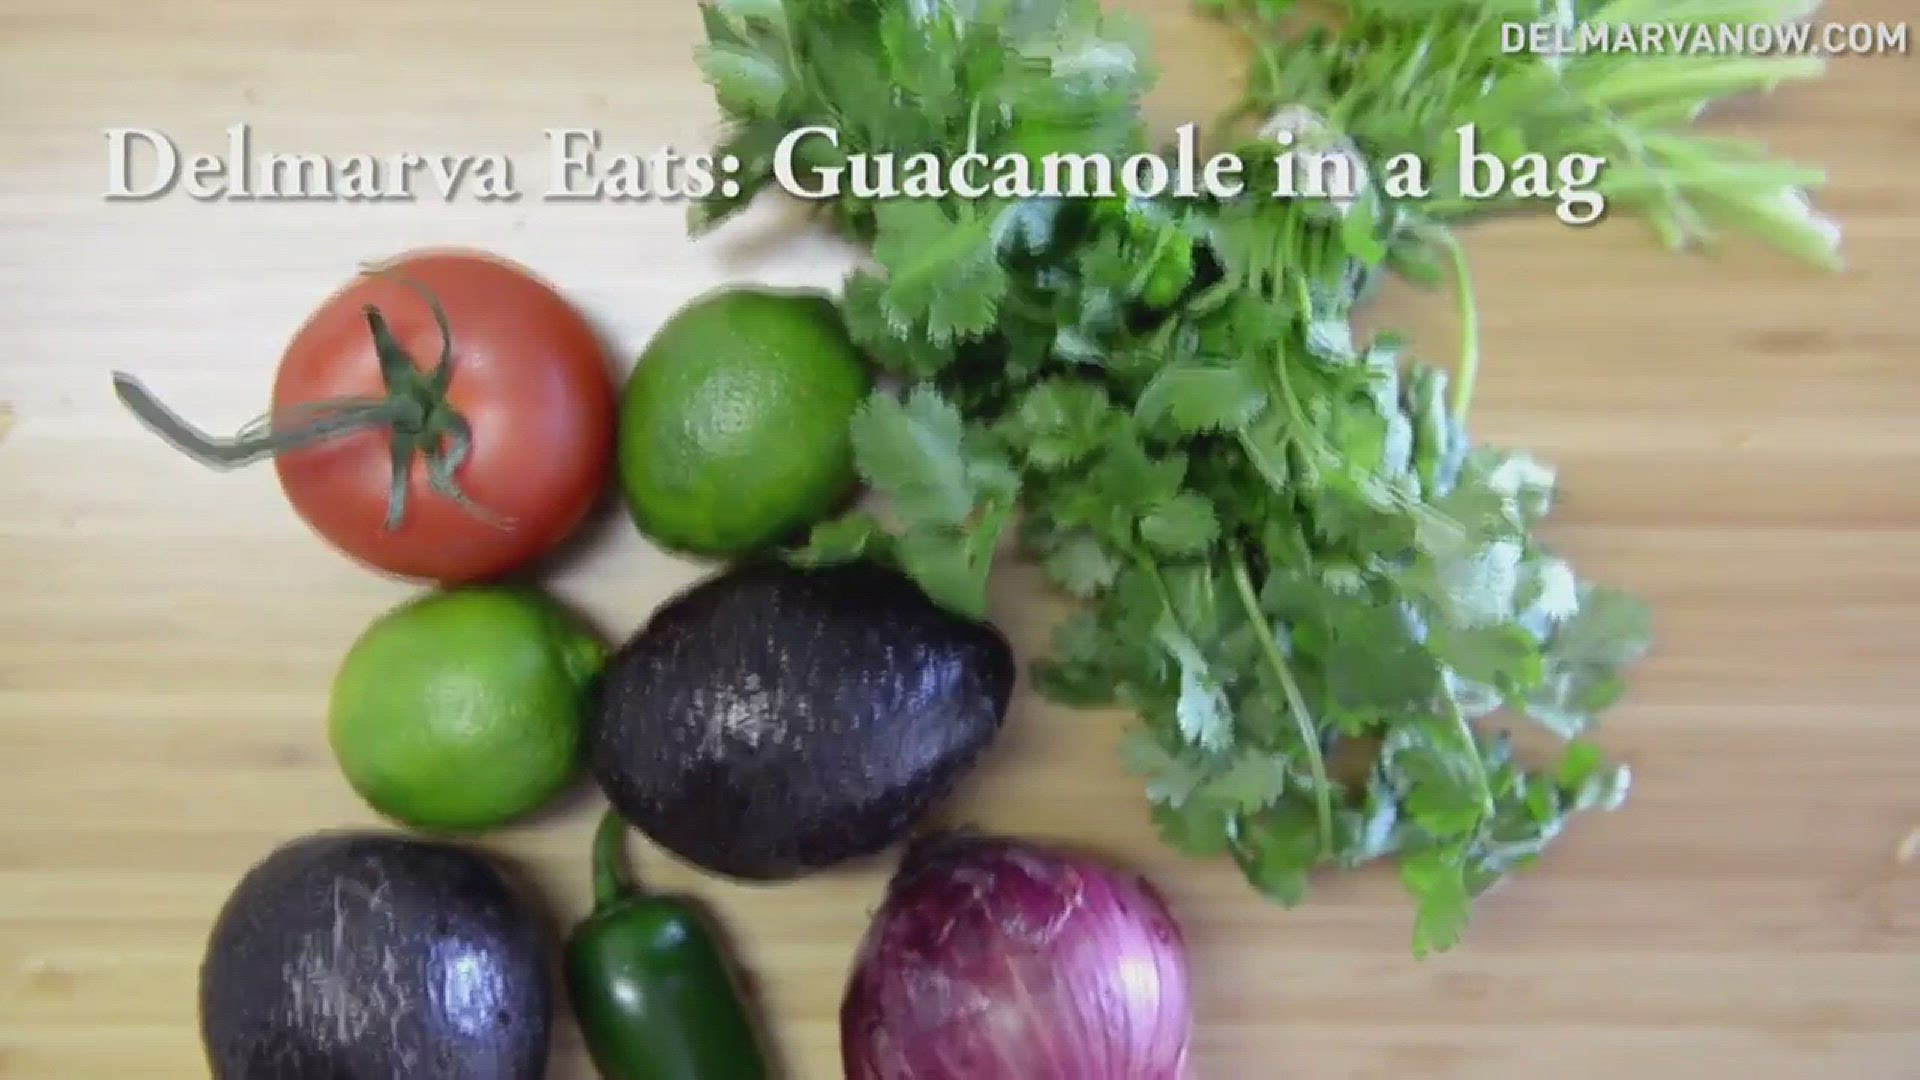 How to make Guacamole in a BagWould you make it or eat it? Video courtesy of the Delmarva Daily Times.